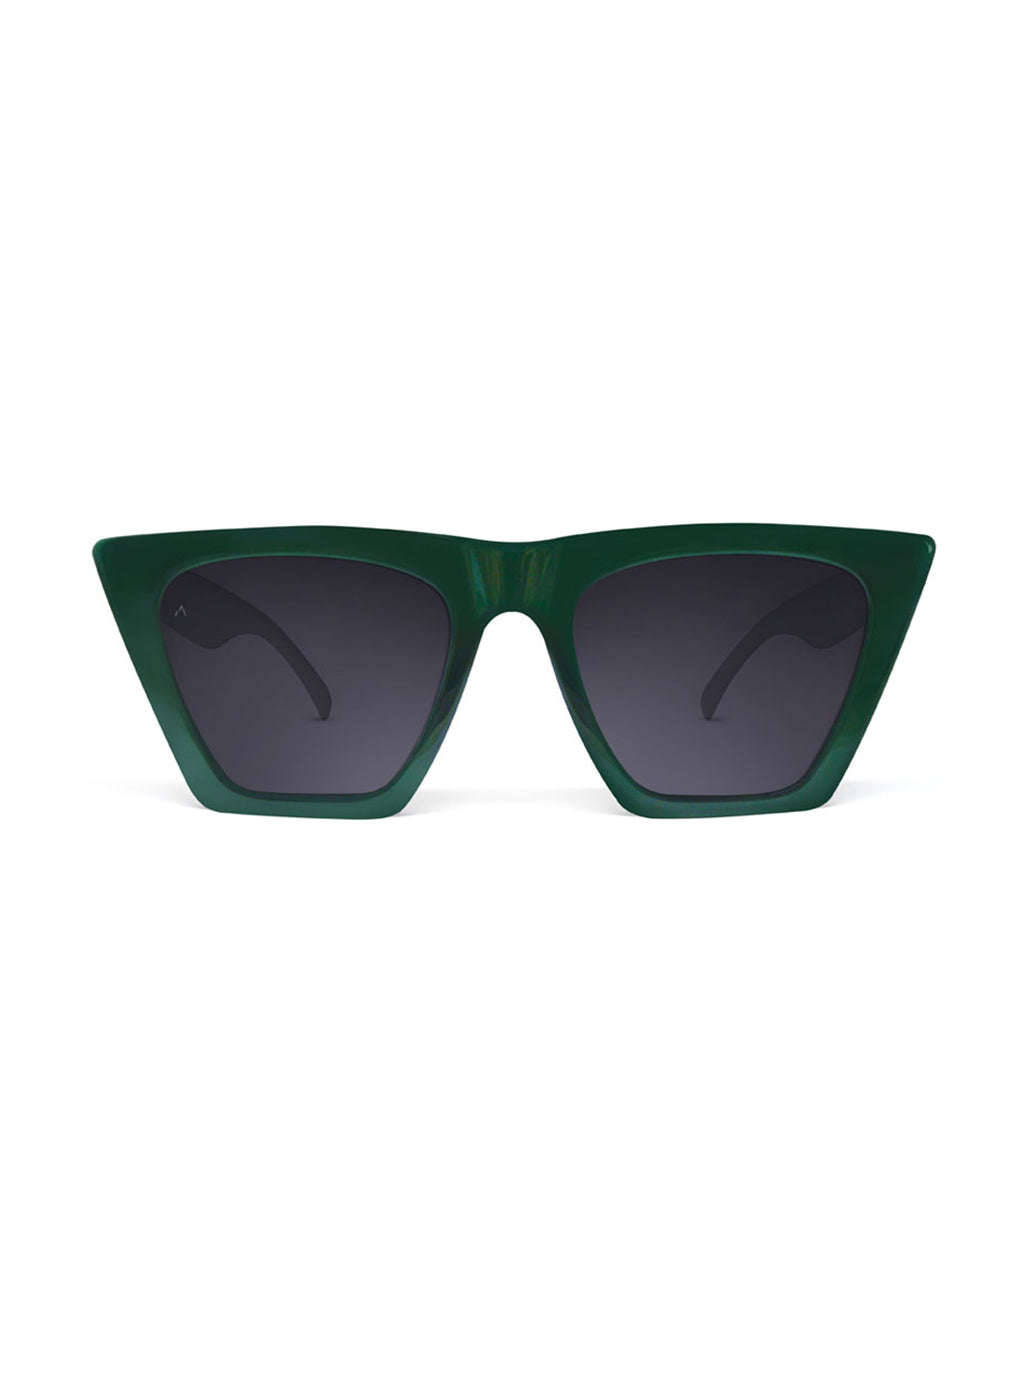 Sigma 2.0 Green with Black Lenses